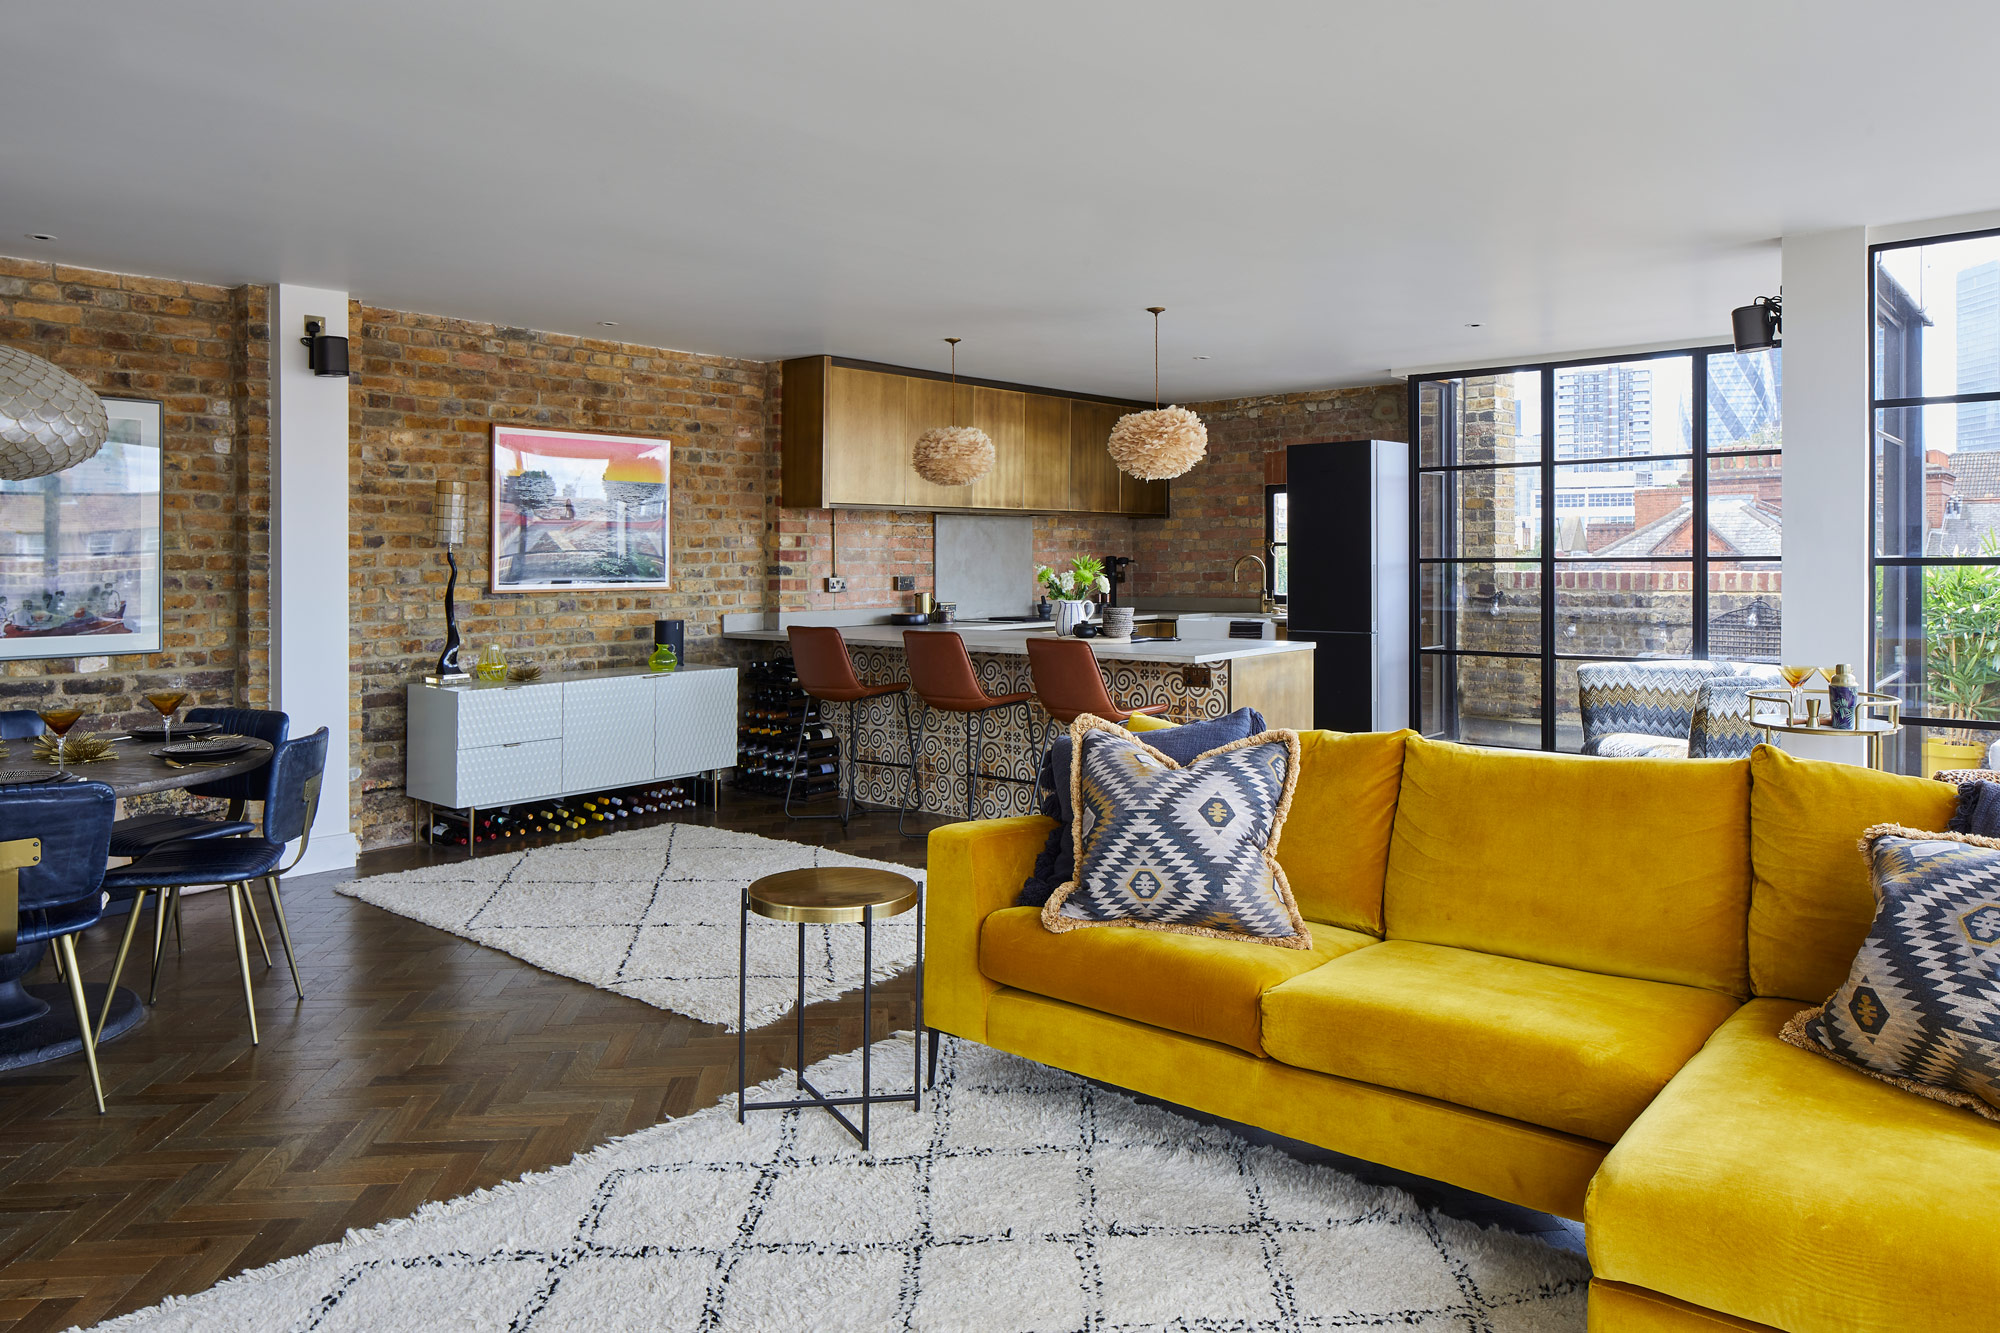 Bright yellow sofa in open plan living space